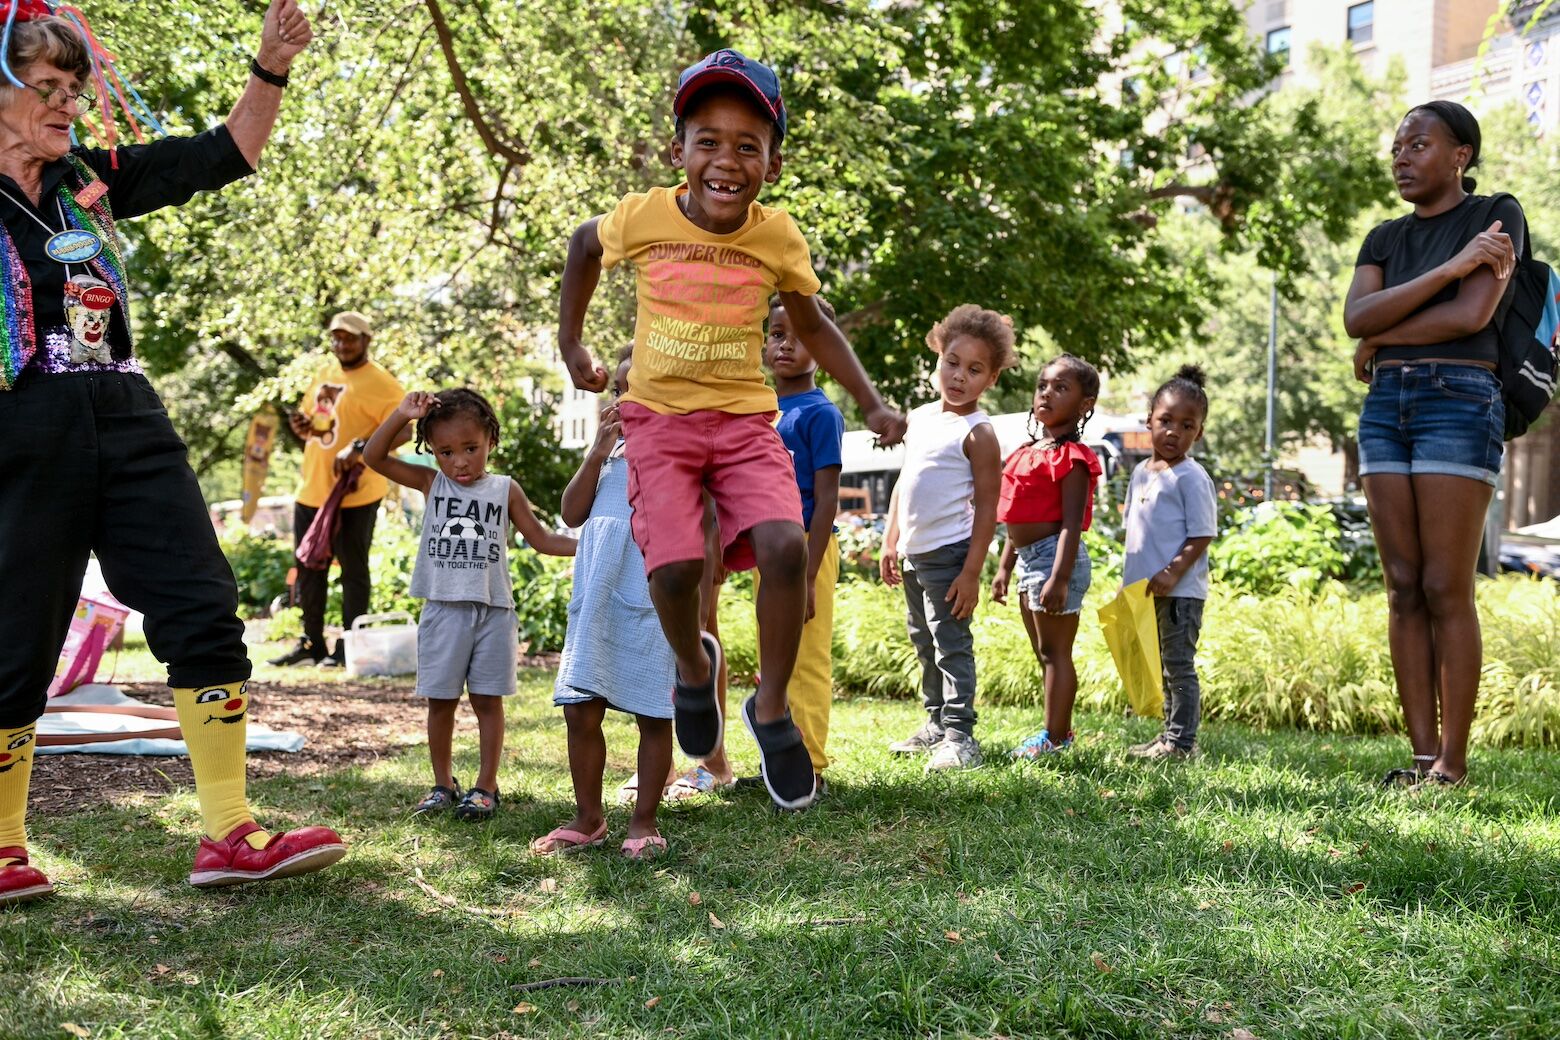 Kids World returns to DC’s Franklin Park for weekend of free fun – WTOP News